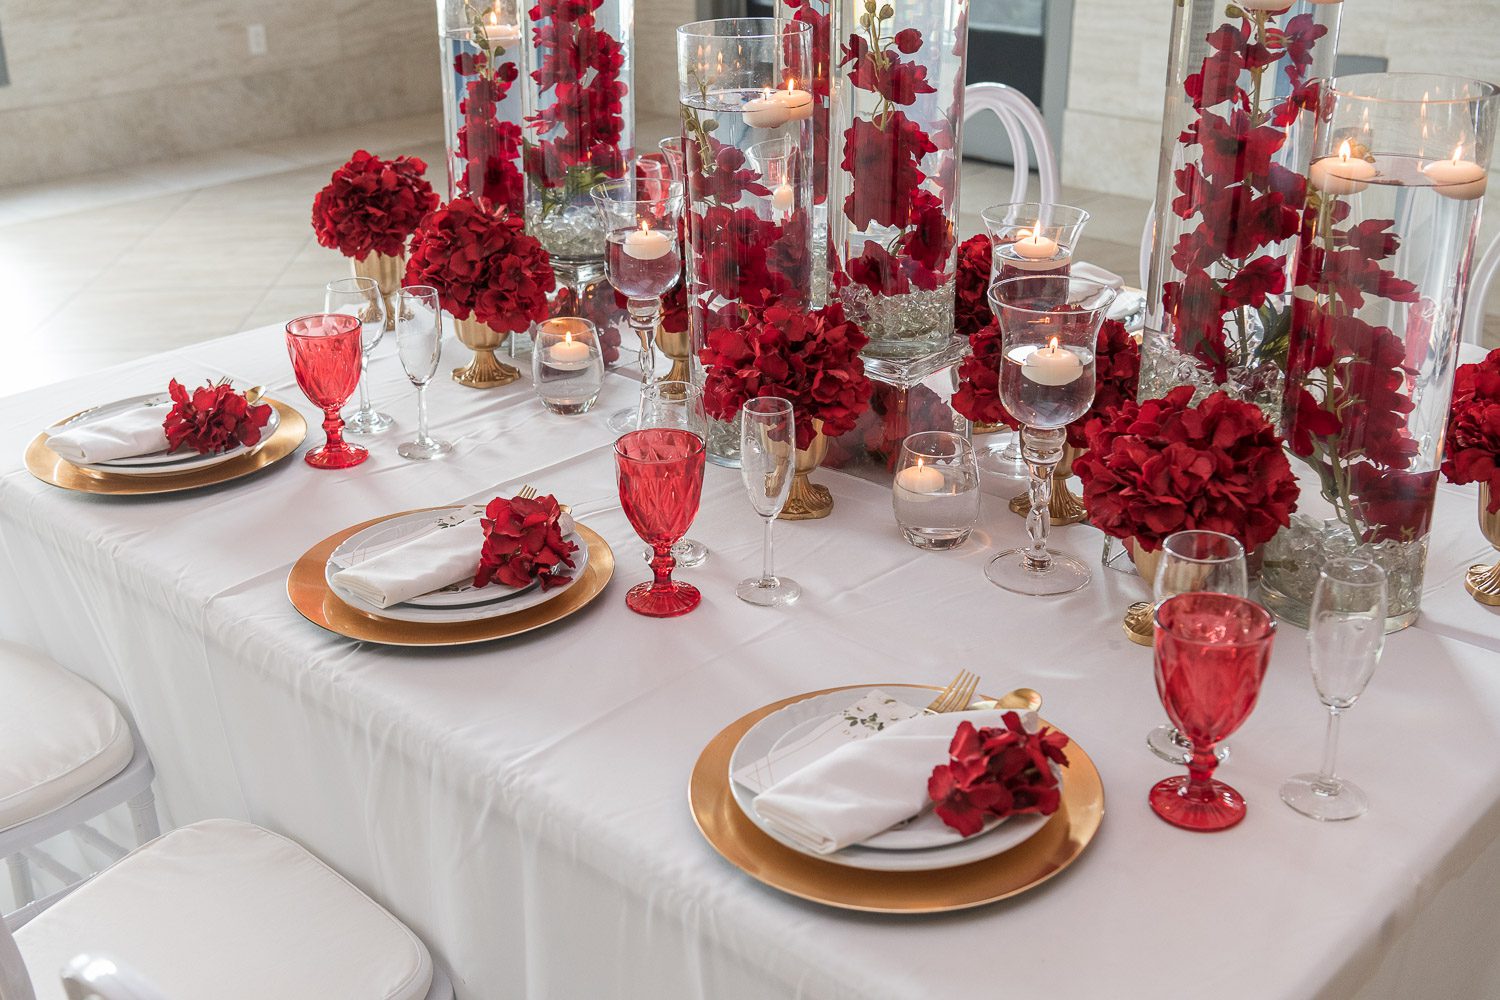 Elegant wedding place setting ideas with red color